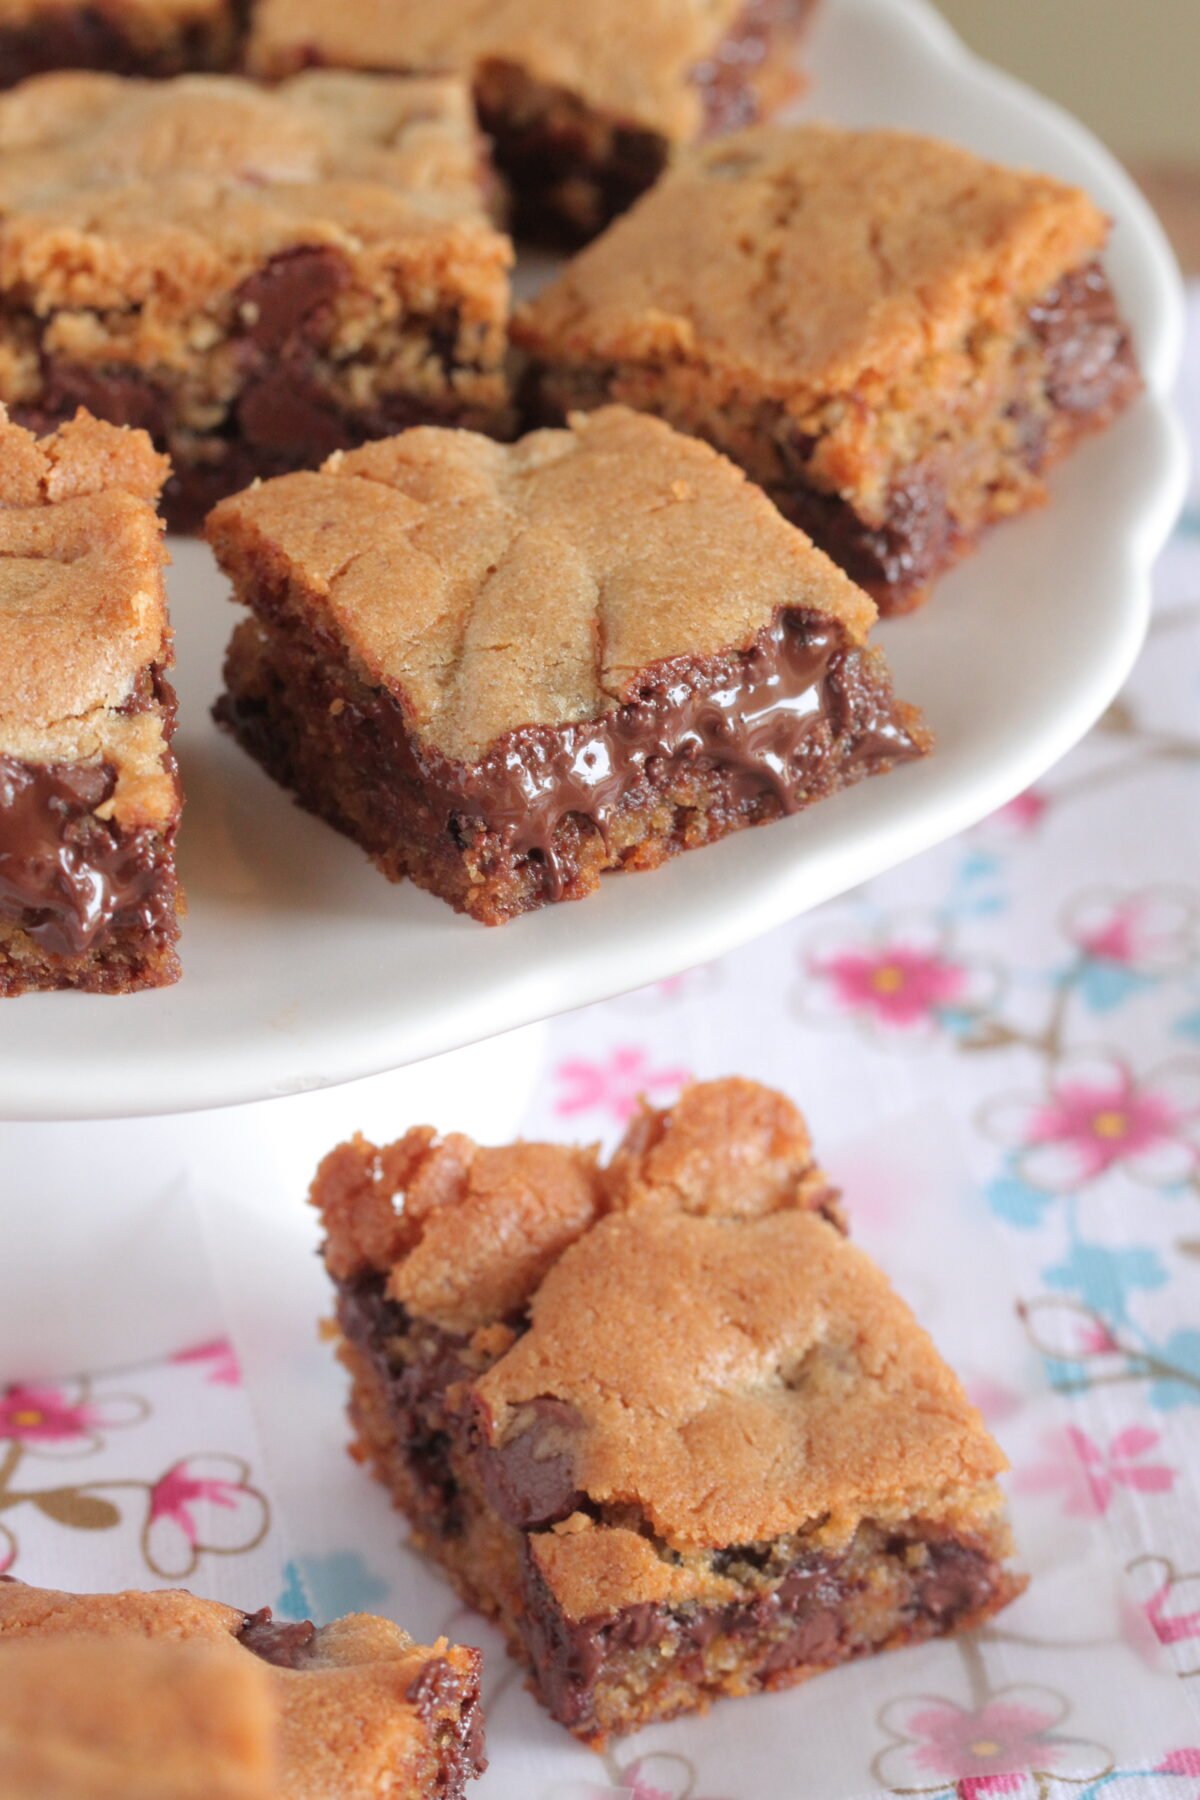 chocolate chip cookie bars on cake stand